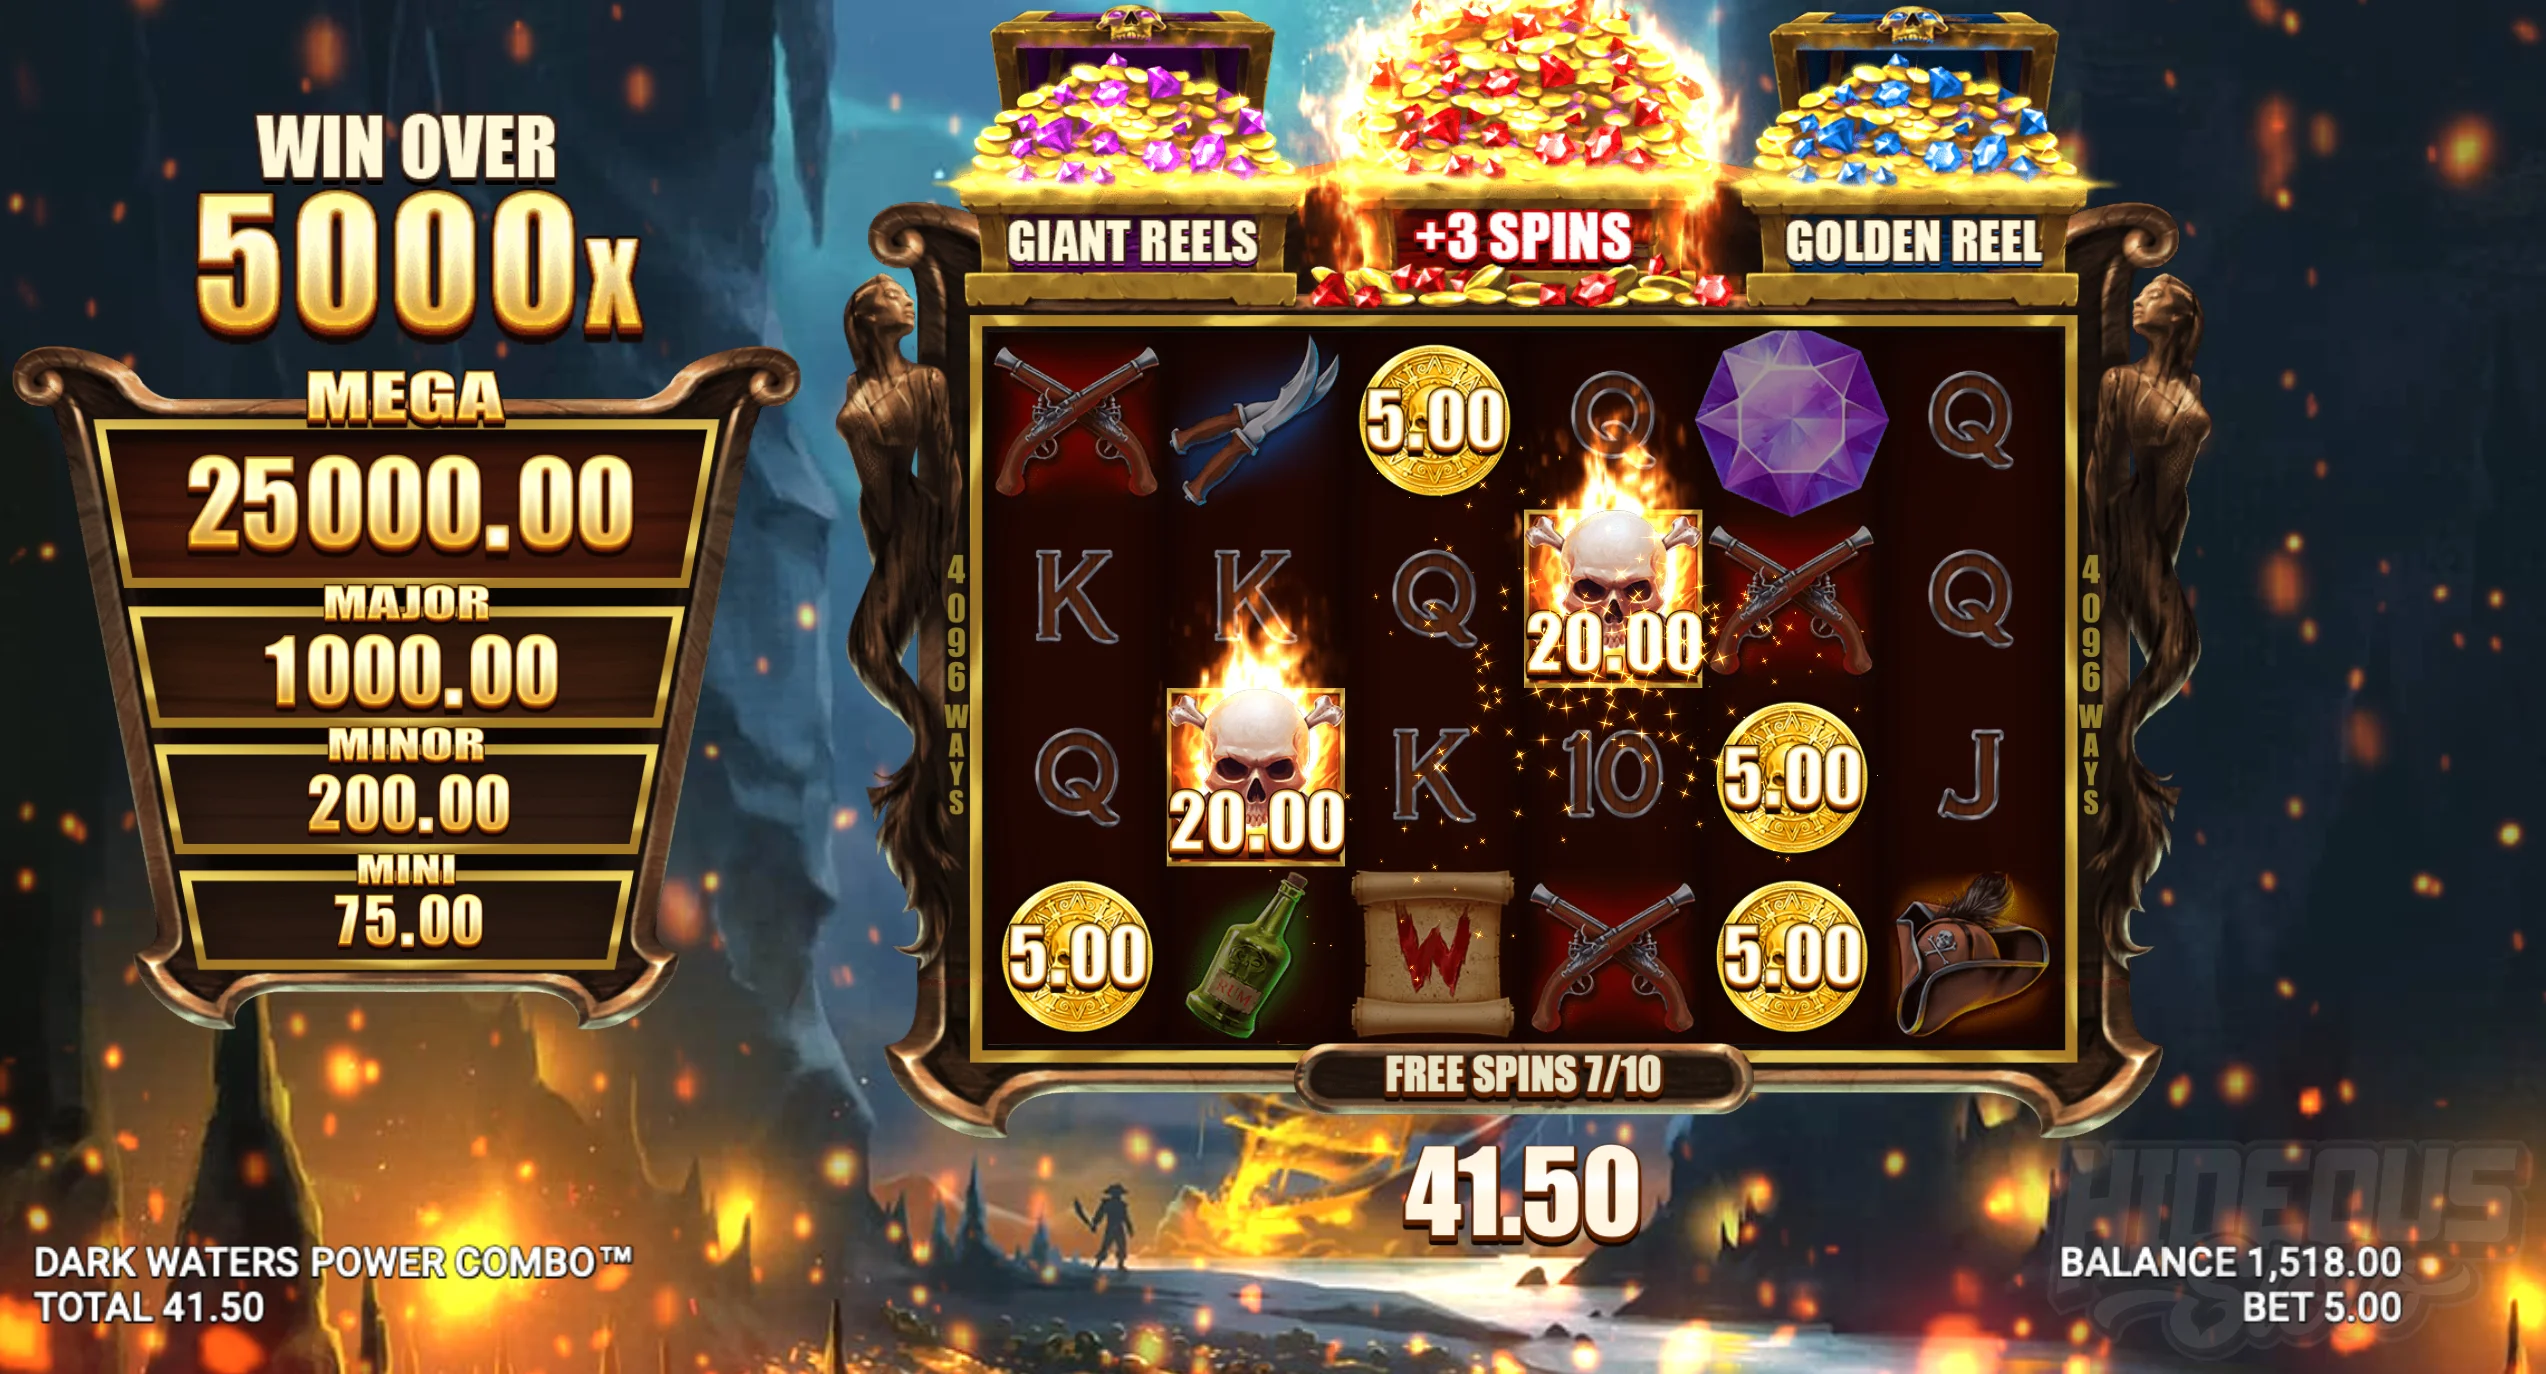 Dark Waters Power Combo Free Spins With Multi-Collect Feature